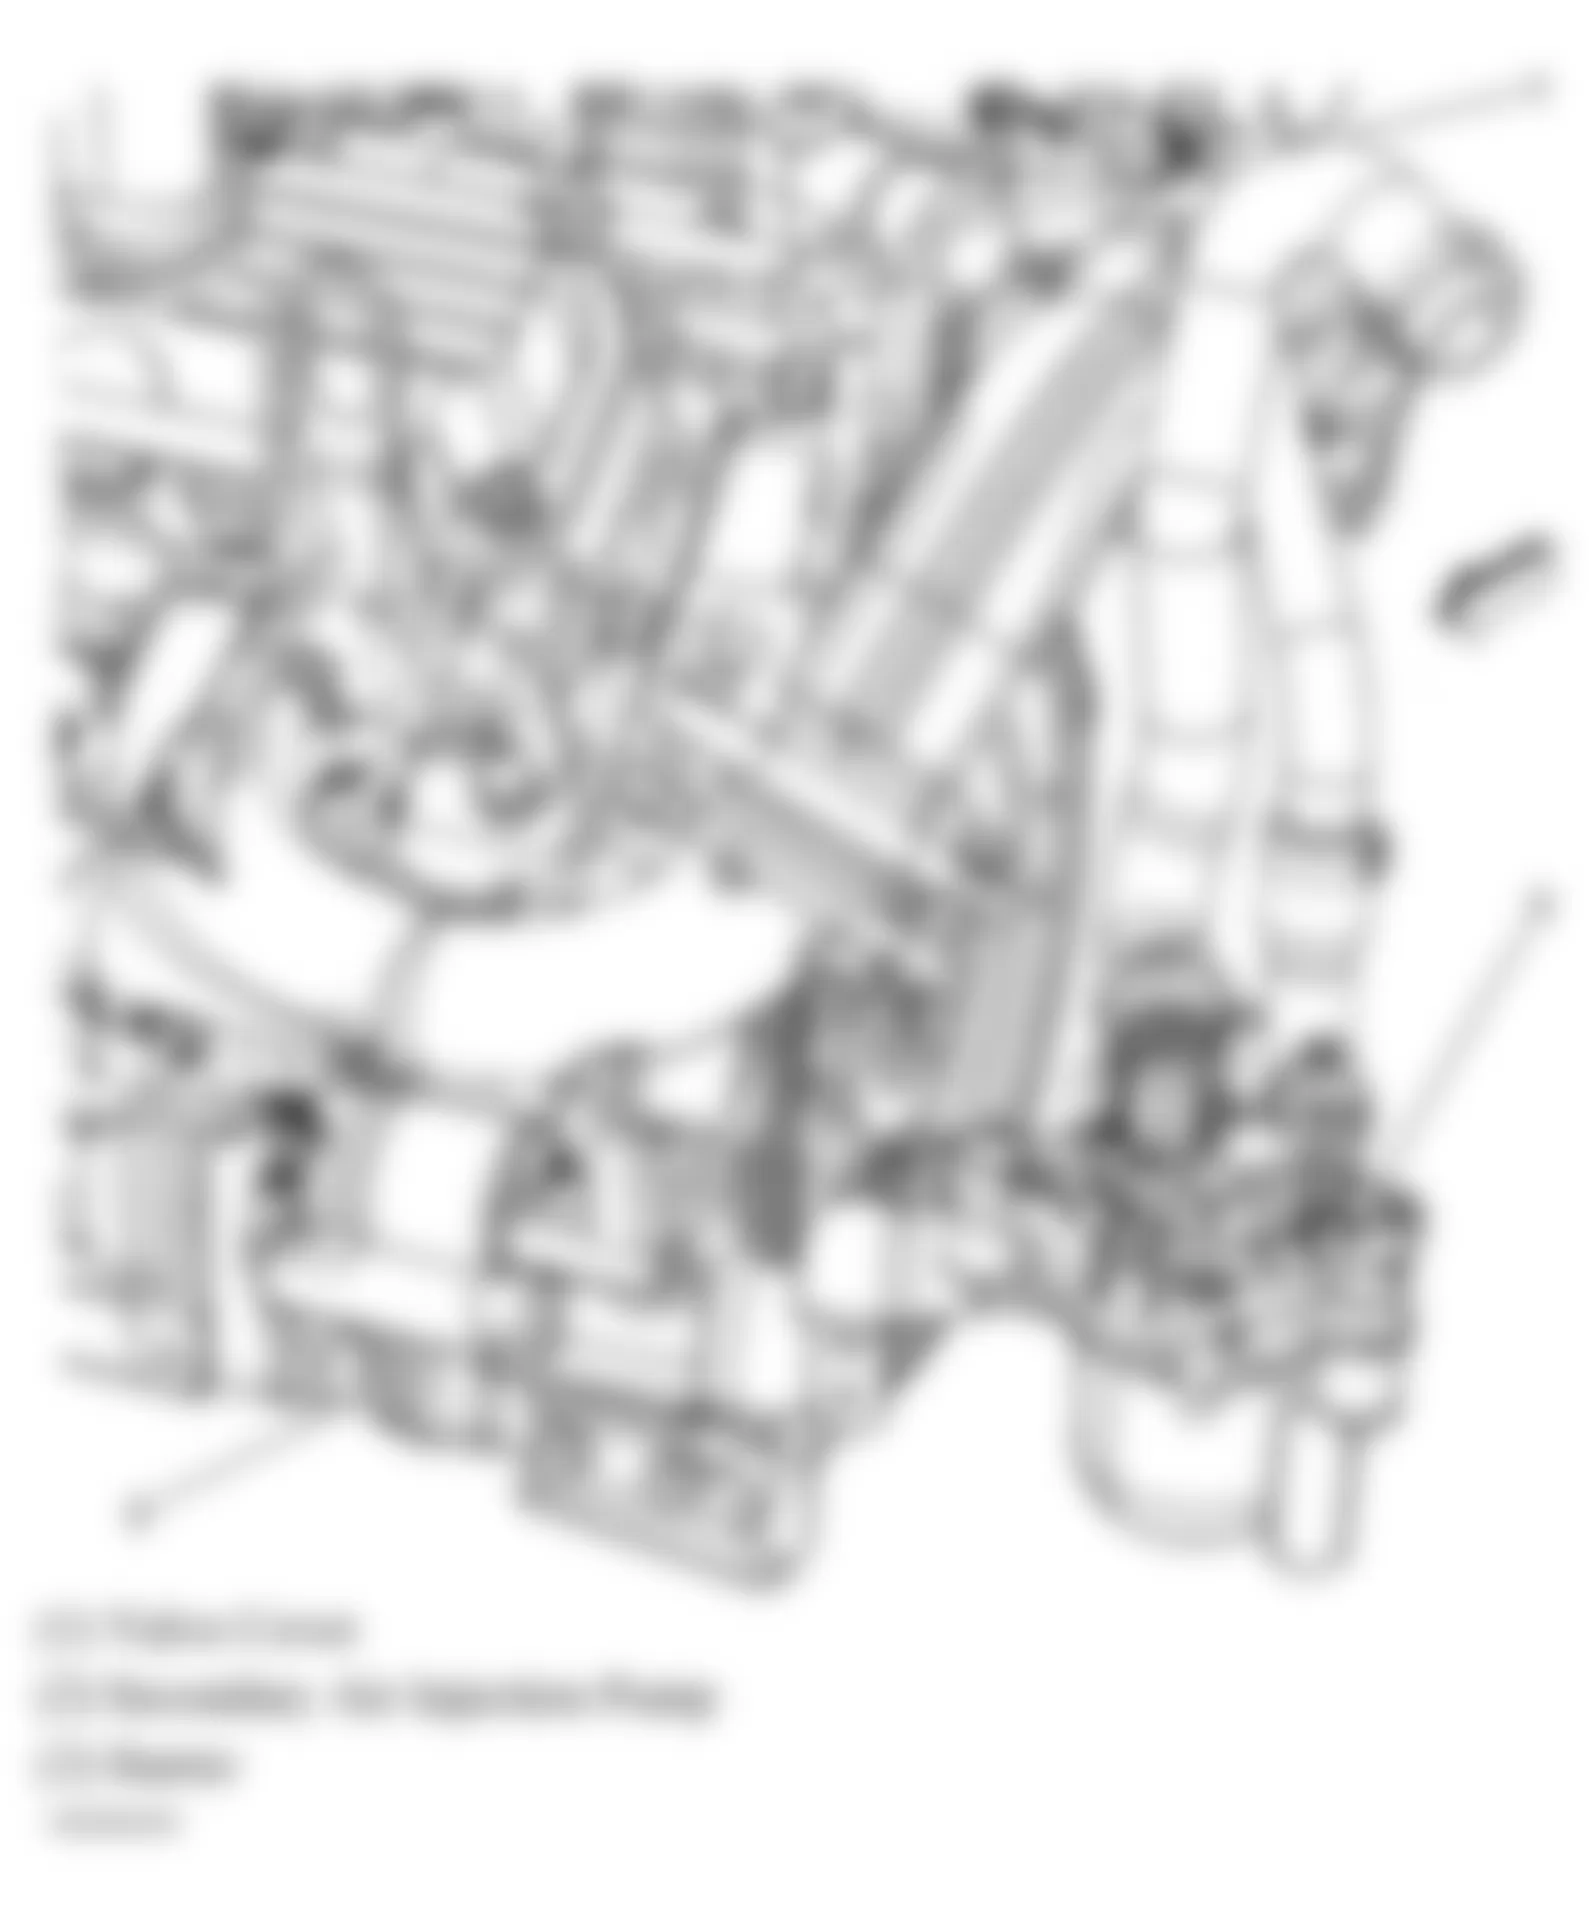 Buick Allure CXL 2005 - Component Locations -  Left Rear Of Engine (3.8L)